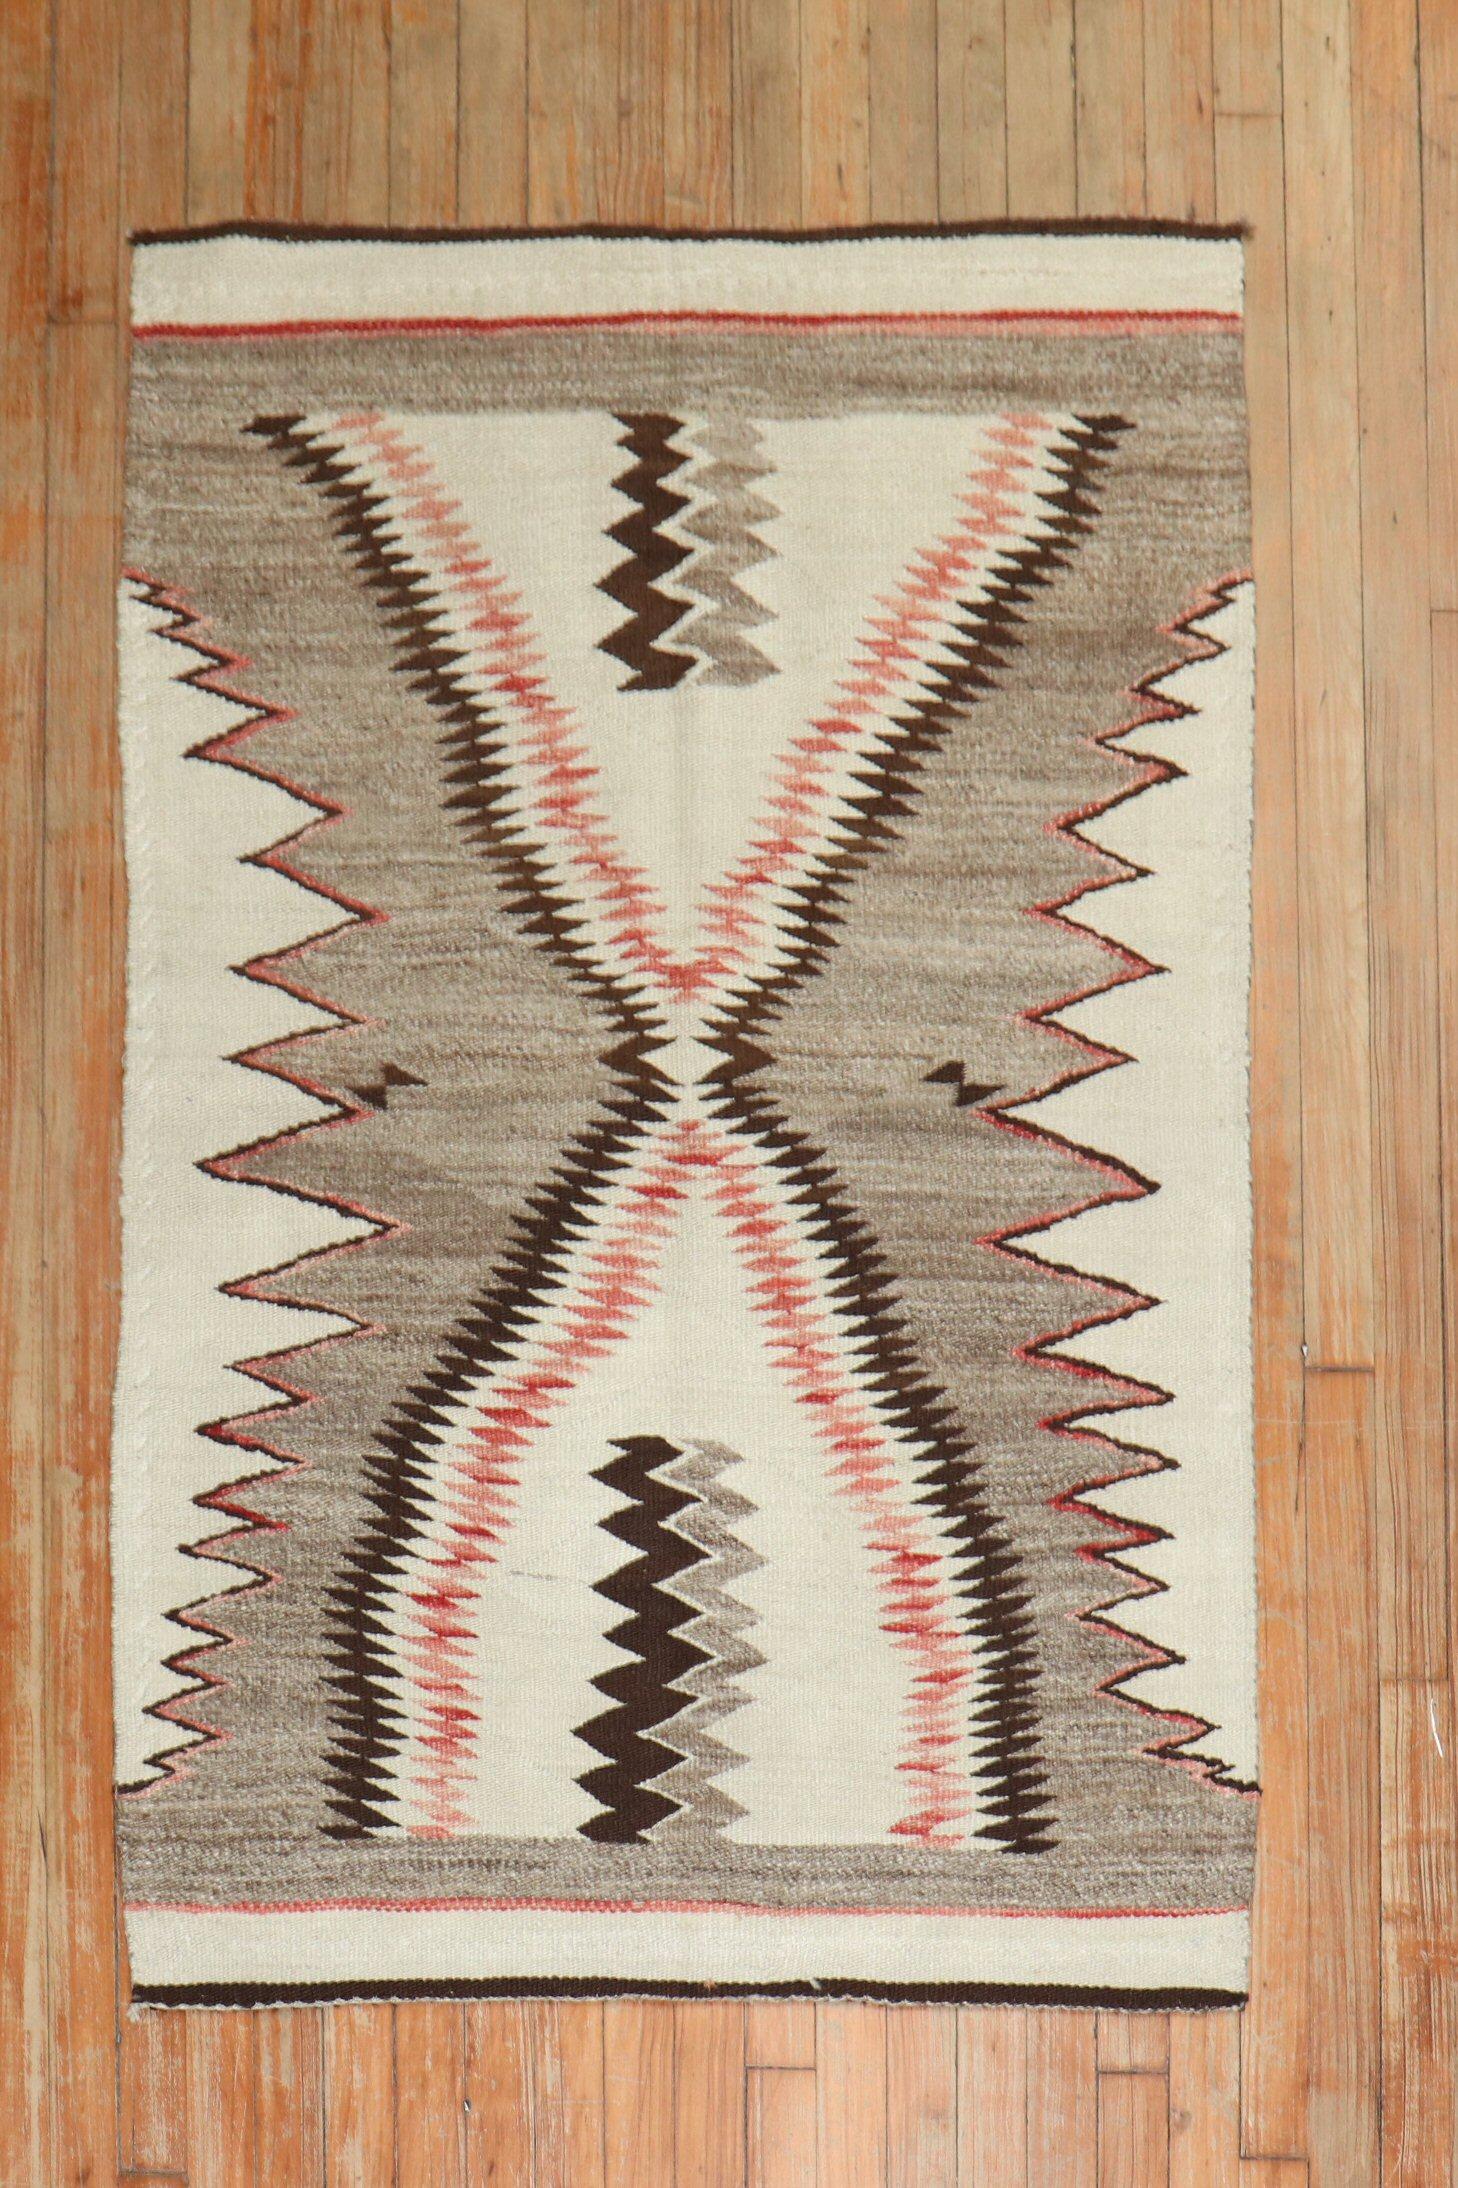 An early 20th-century high-decorative American Navajo rug featuring a pattern resembling a sharks tooth in gray, ivory and coral

Measures: 3'1